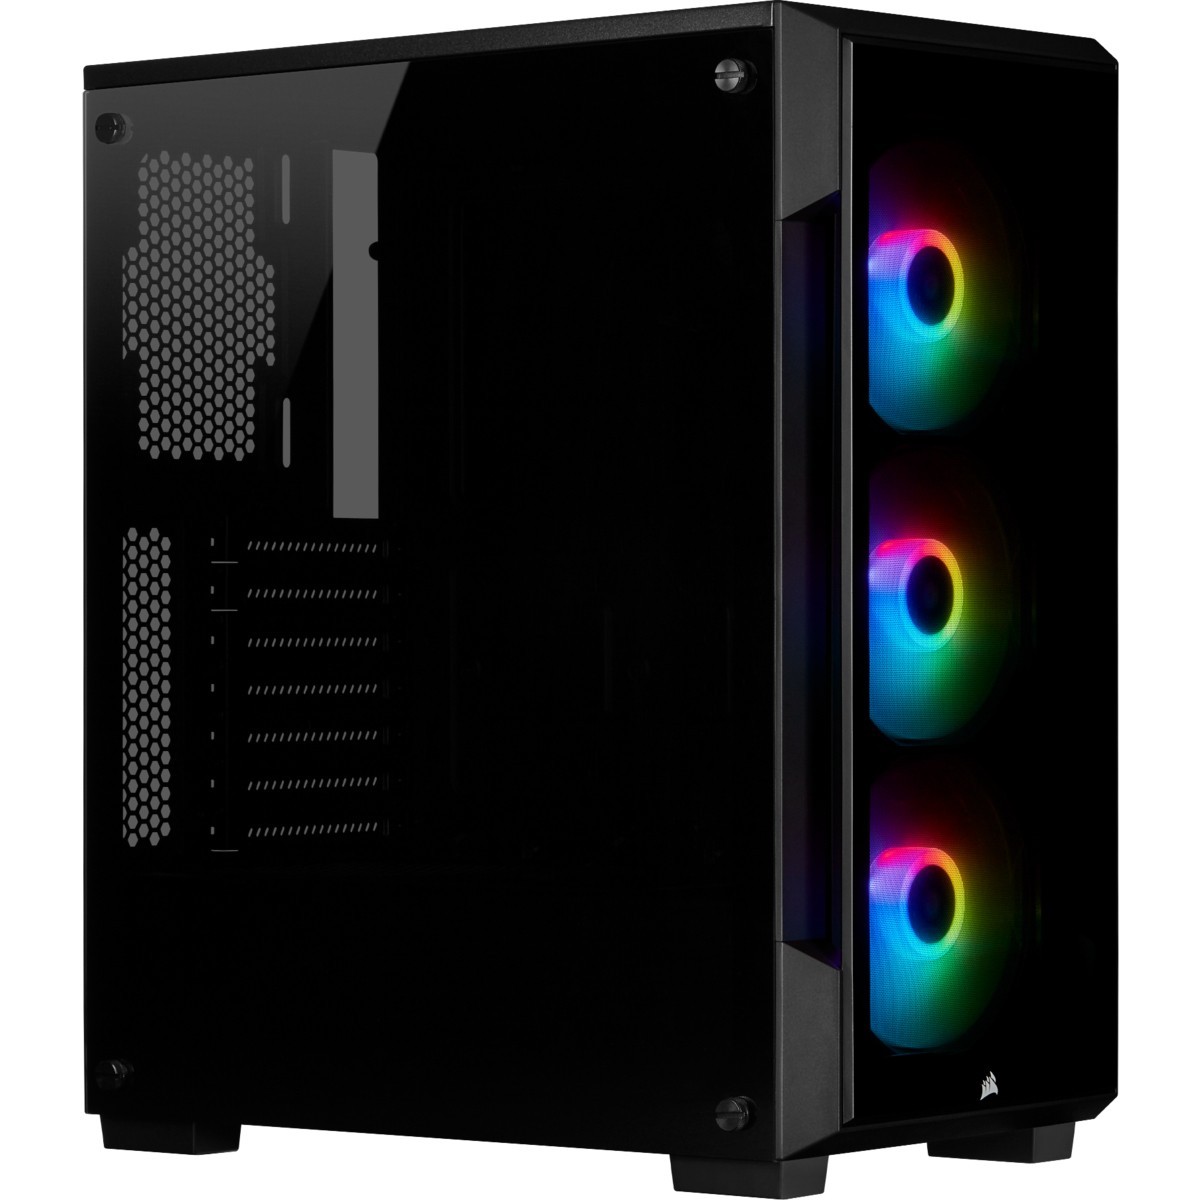 Corsair iCUE 220T RGB - Midi Tower - PC - Steel - Tempered glass - Black - Red-Green-Blue - Case fans